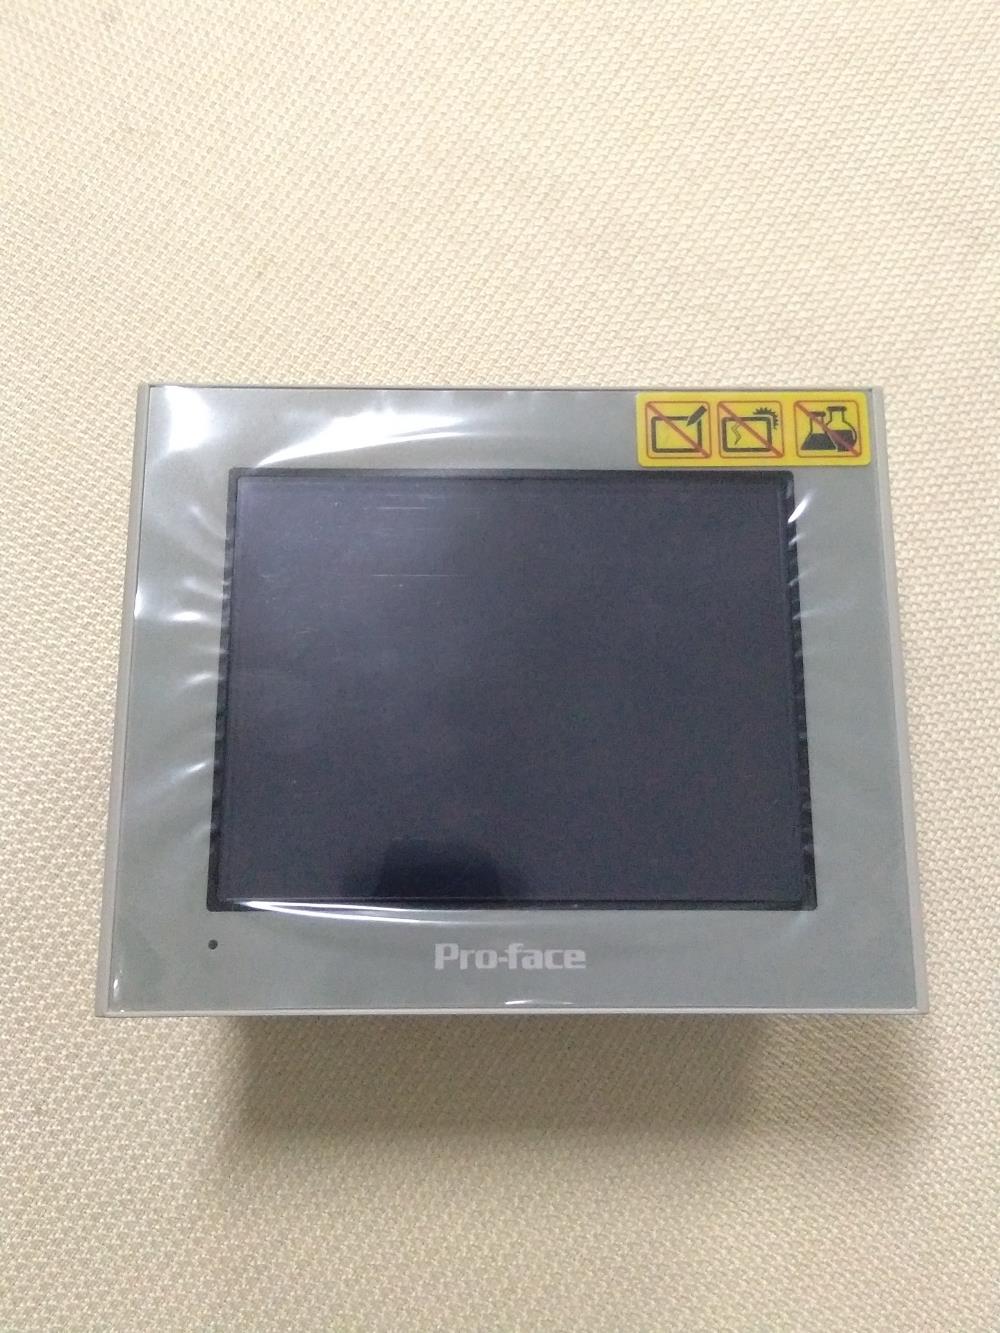 PRO-FACE HMI จอทัชสกรีน AST3301-S1-D24 GP2301-SC41-24V **สินค้าใหม่ รับประกัน 1 ปี**,นครราชสีมา PRO FACE HMI จอทัชสกรีน AST3301-S1-D24 GP2301-SC41-24V โคราช,,Automation and Electronics/Electronic Components/Touch Screen